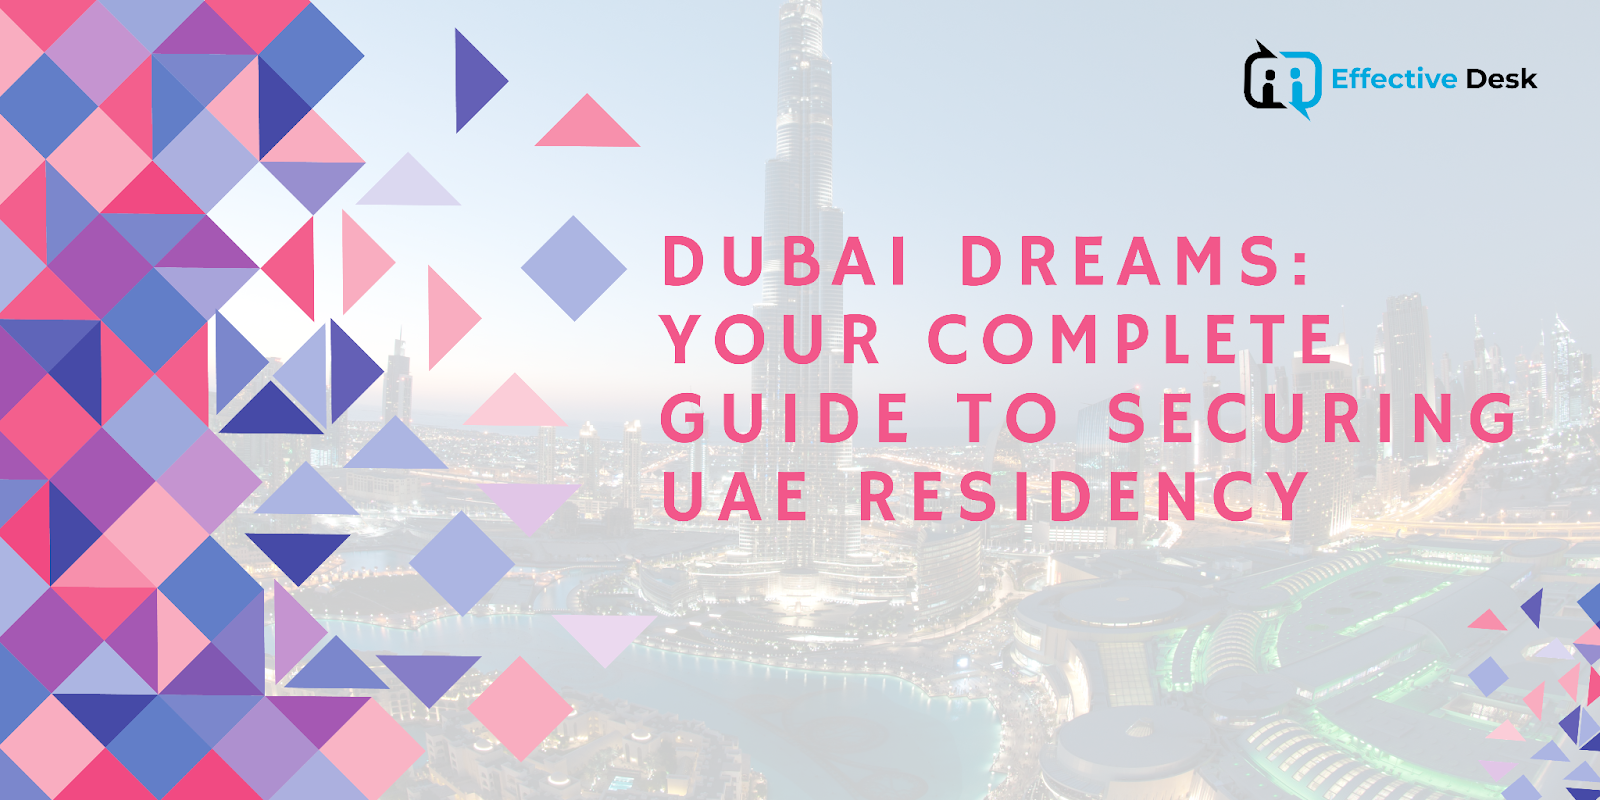 Dubai Dreams: Your Complete Guide to Securing UAE Residency